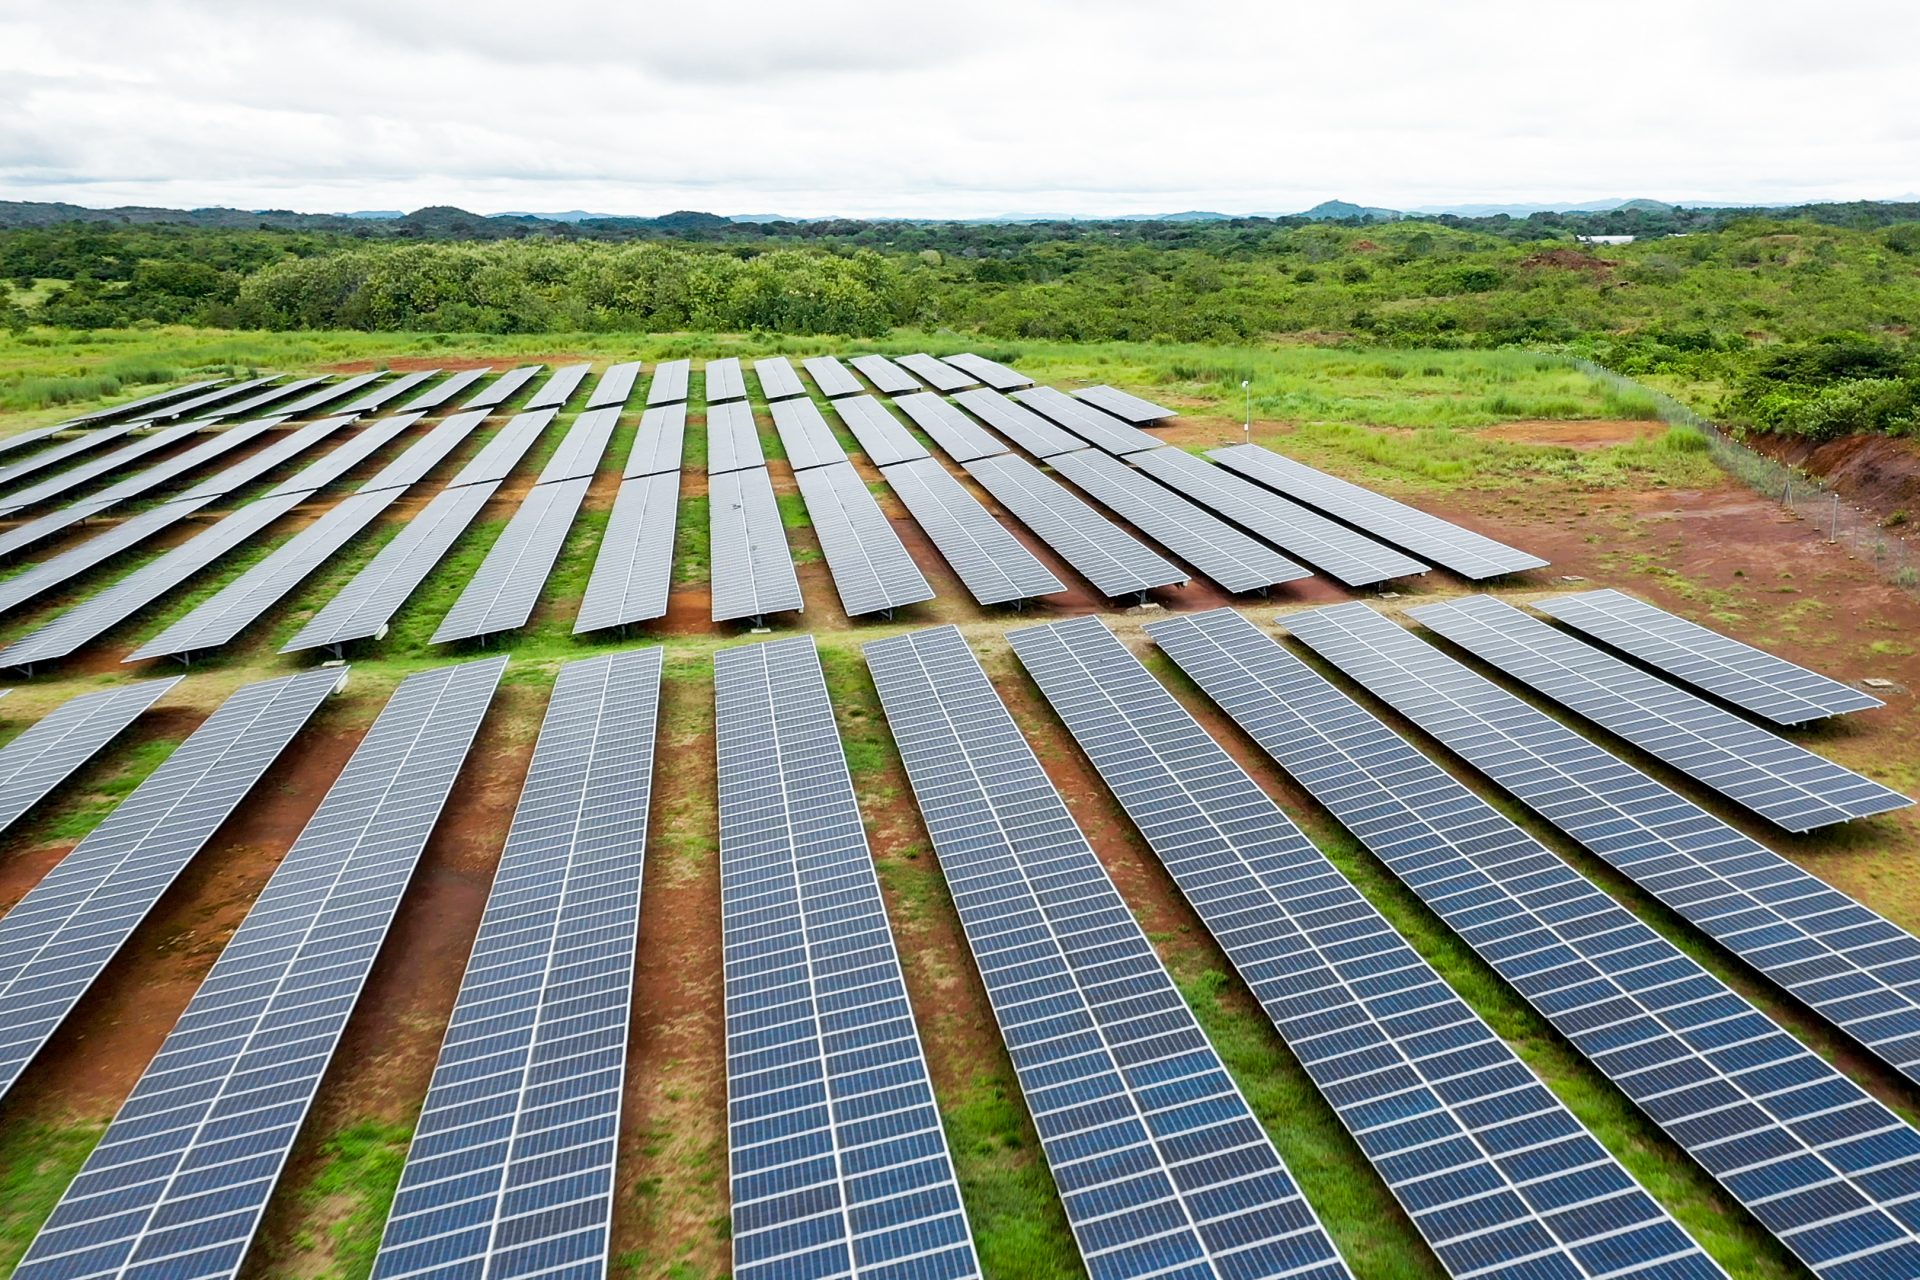 International solar development company gets foothold in New York, plans national expansion